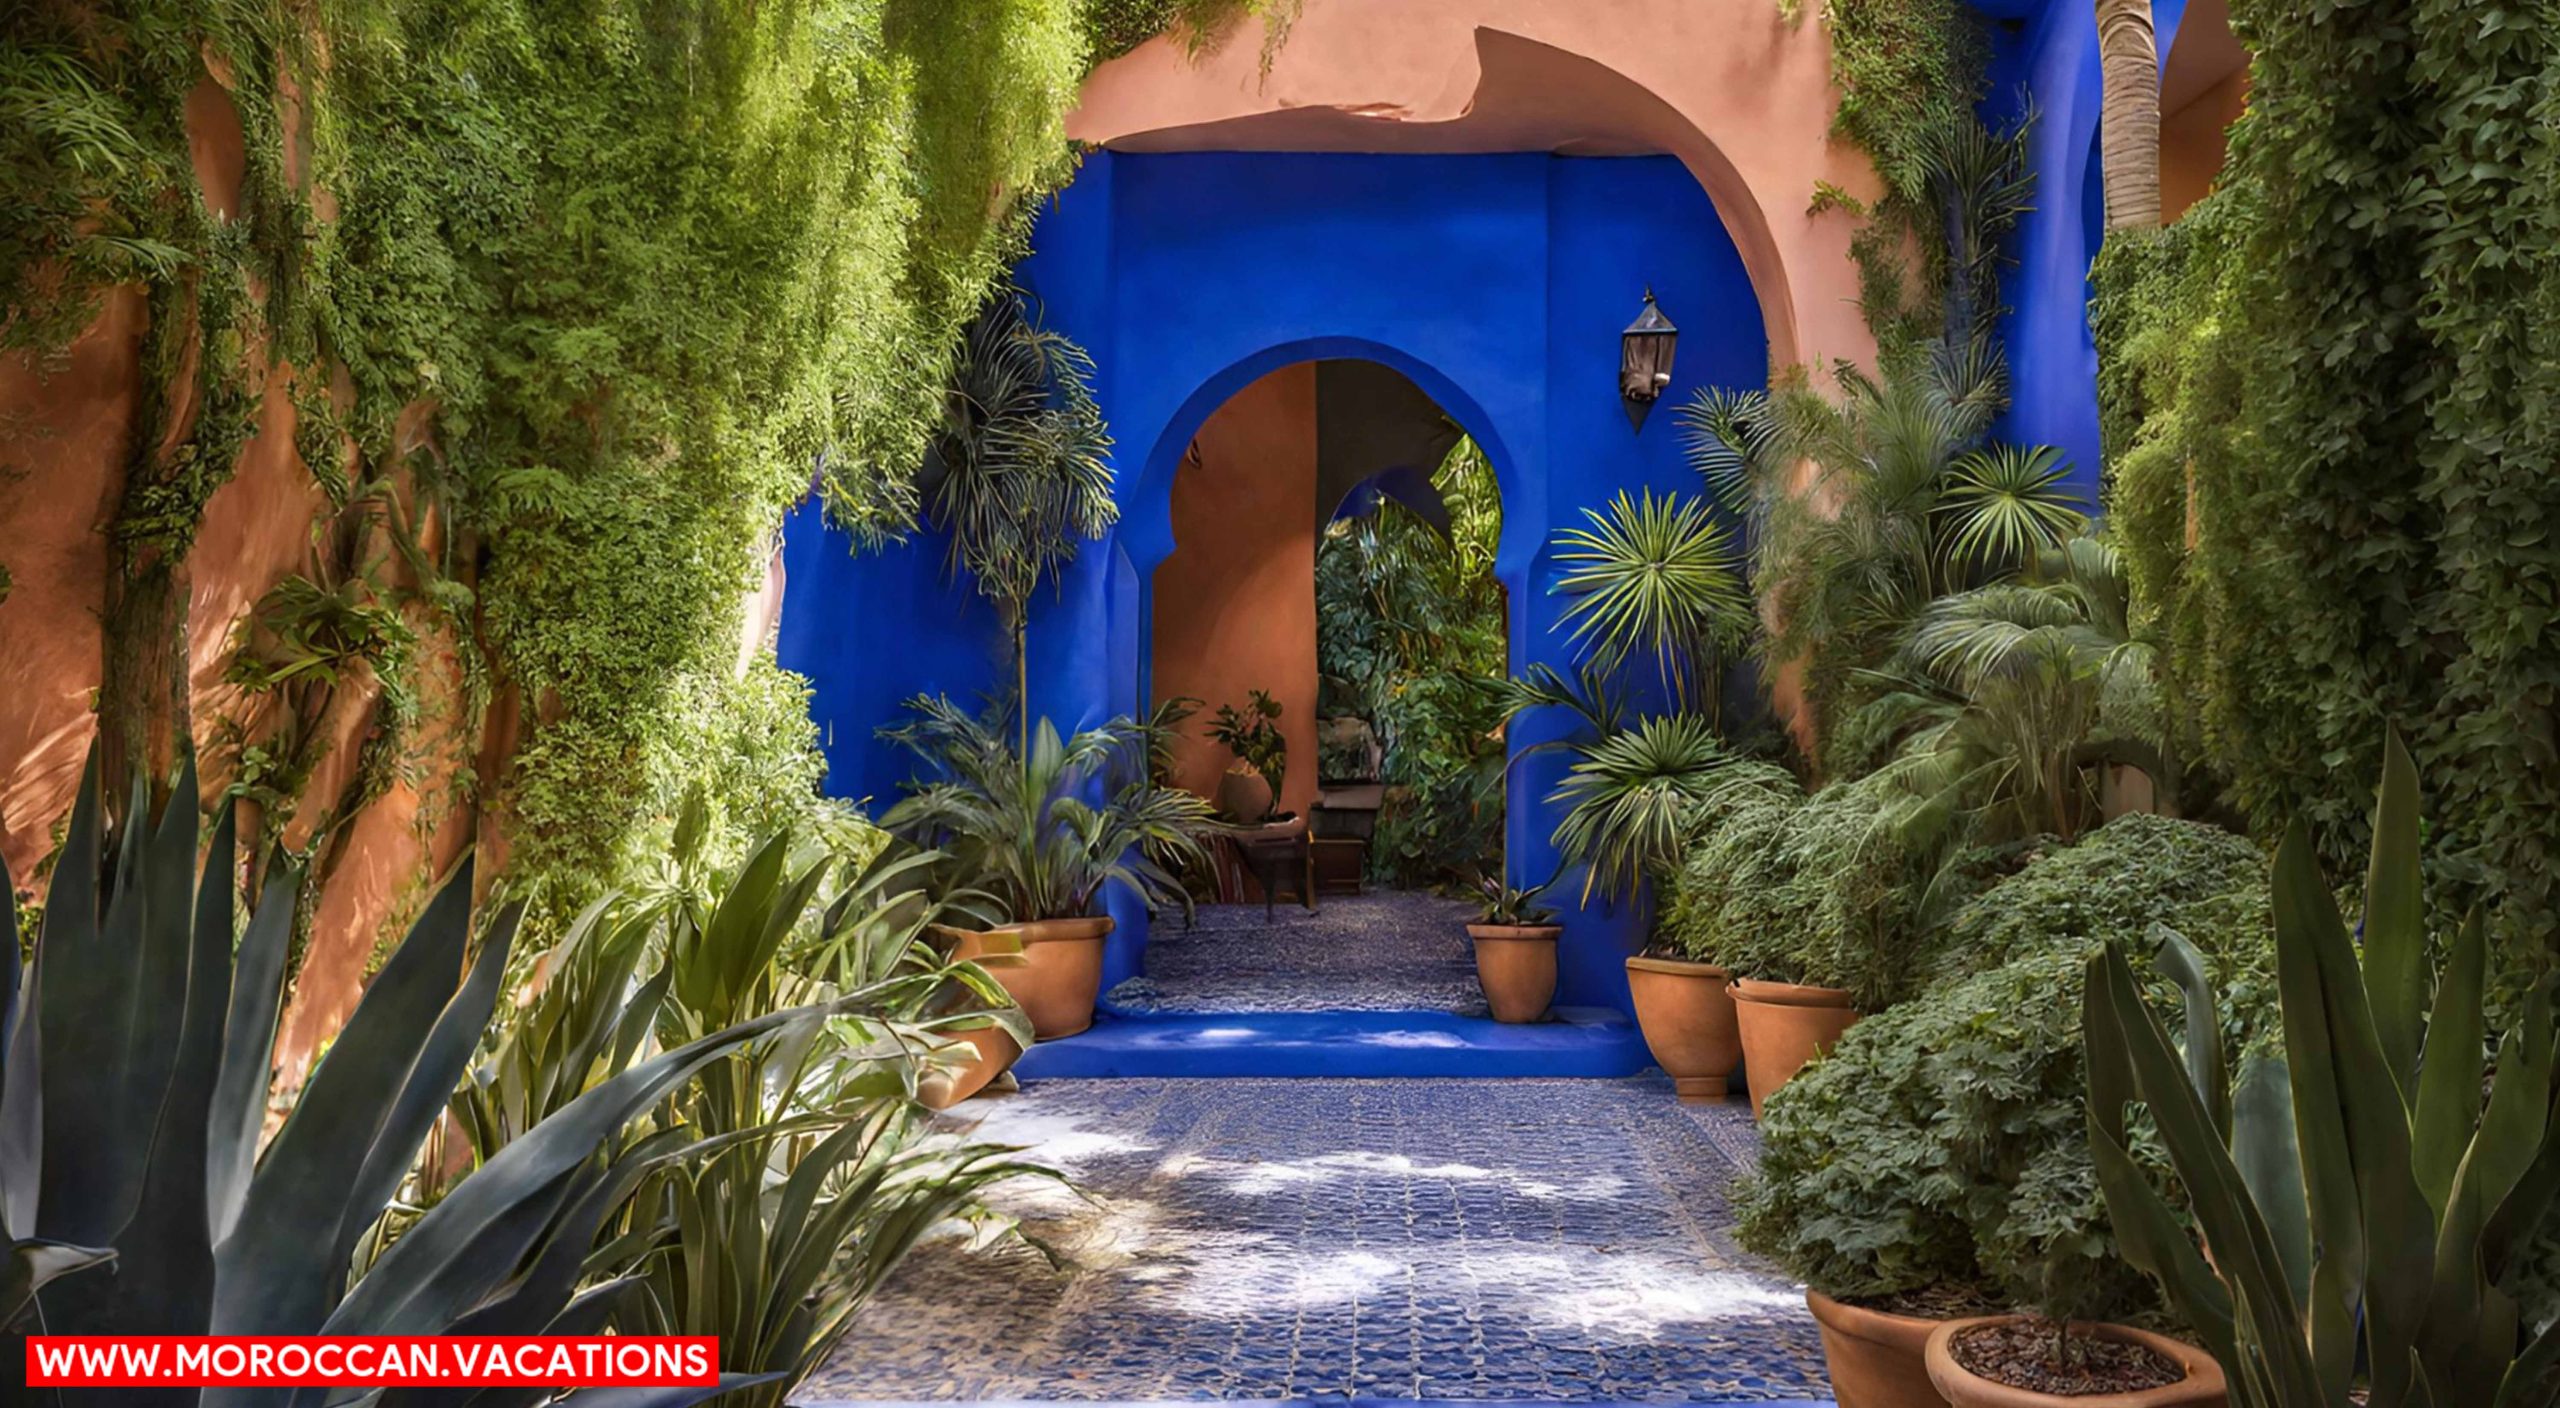 Majorelle Garden by focusing on a group of curious visitors, marveling at the cobalt blue walls adorned with lush green foliage.